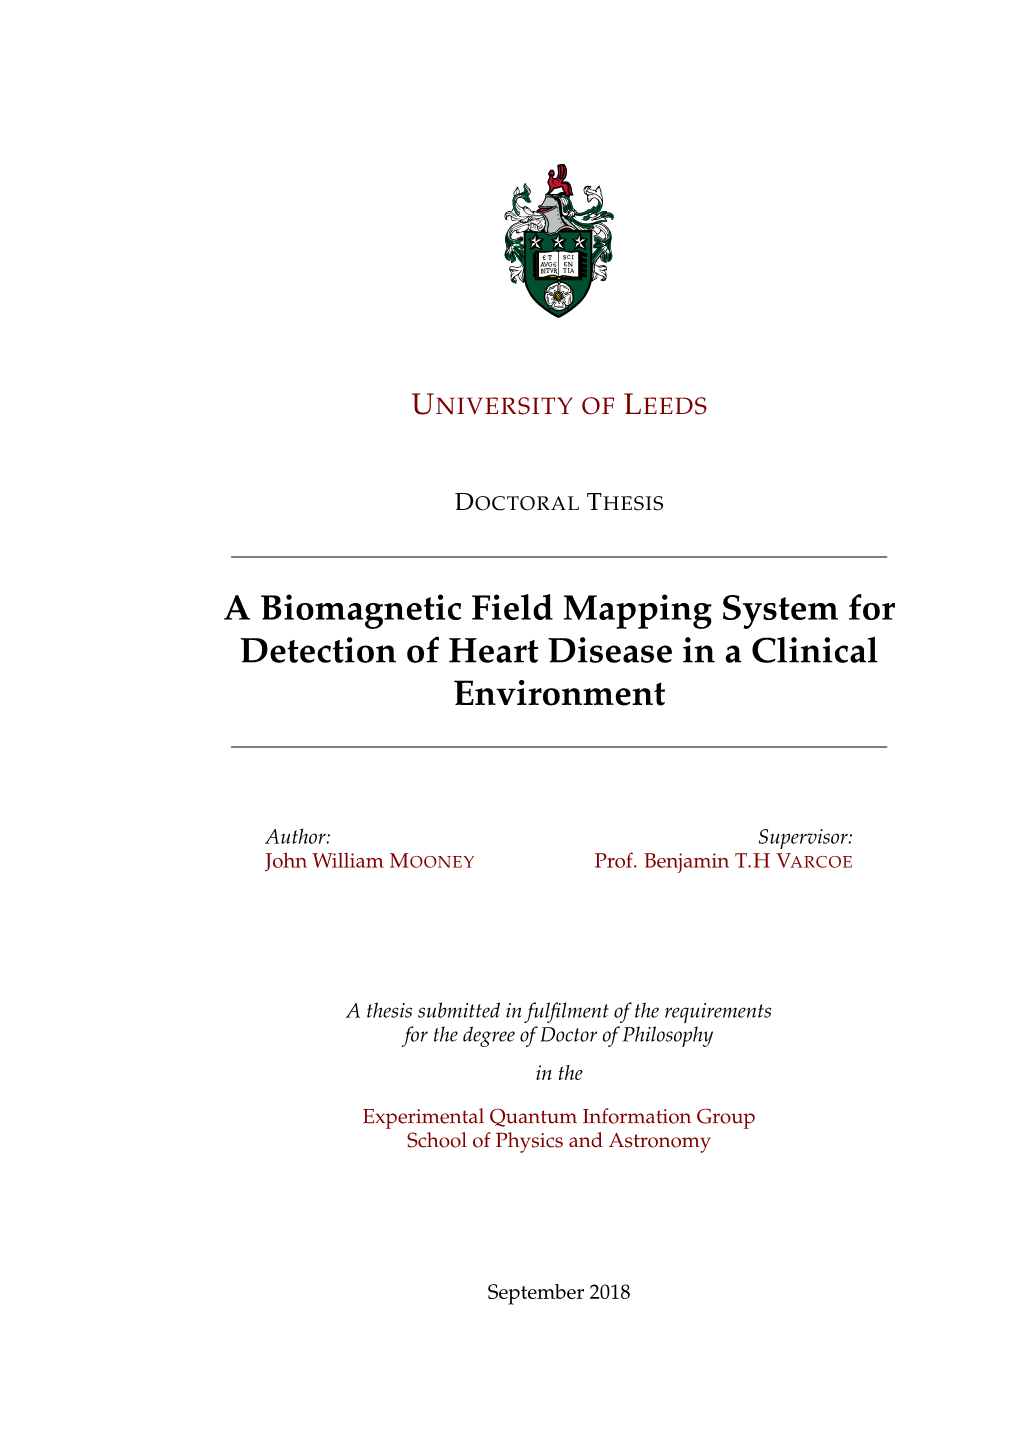 A Biomagnetic Field Mapping System for Detection of Heart Disease in a Clinical Environment